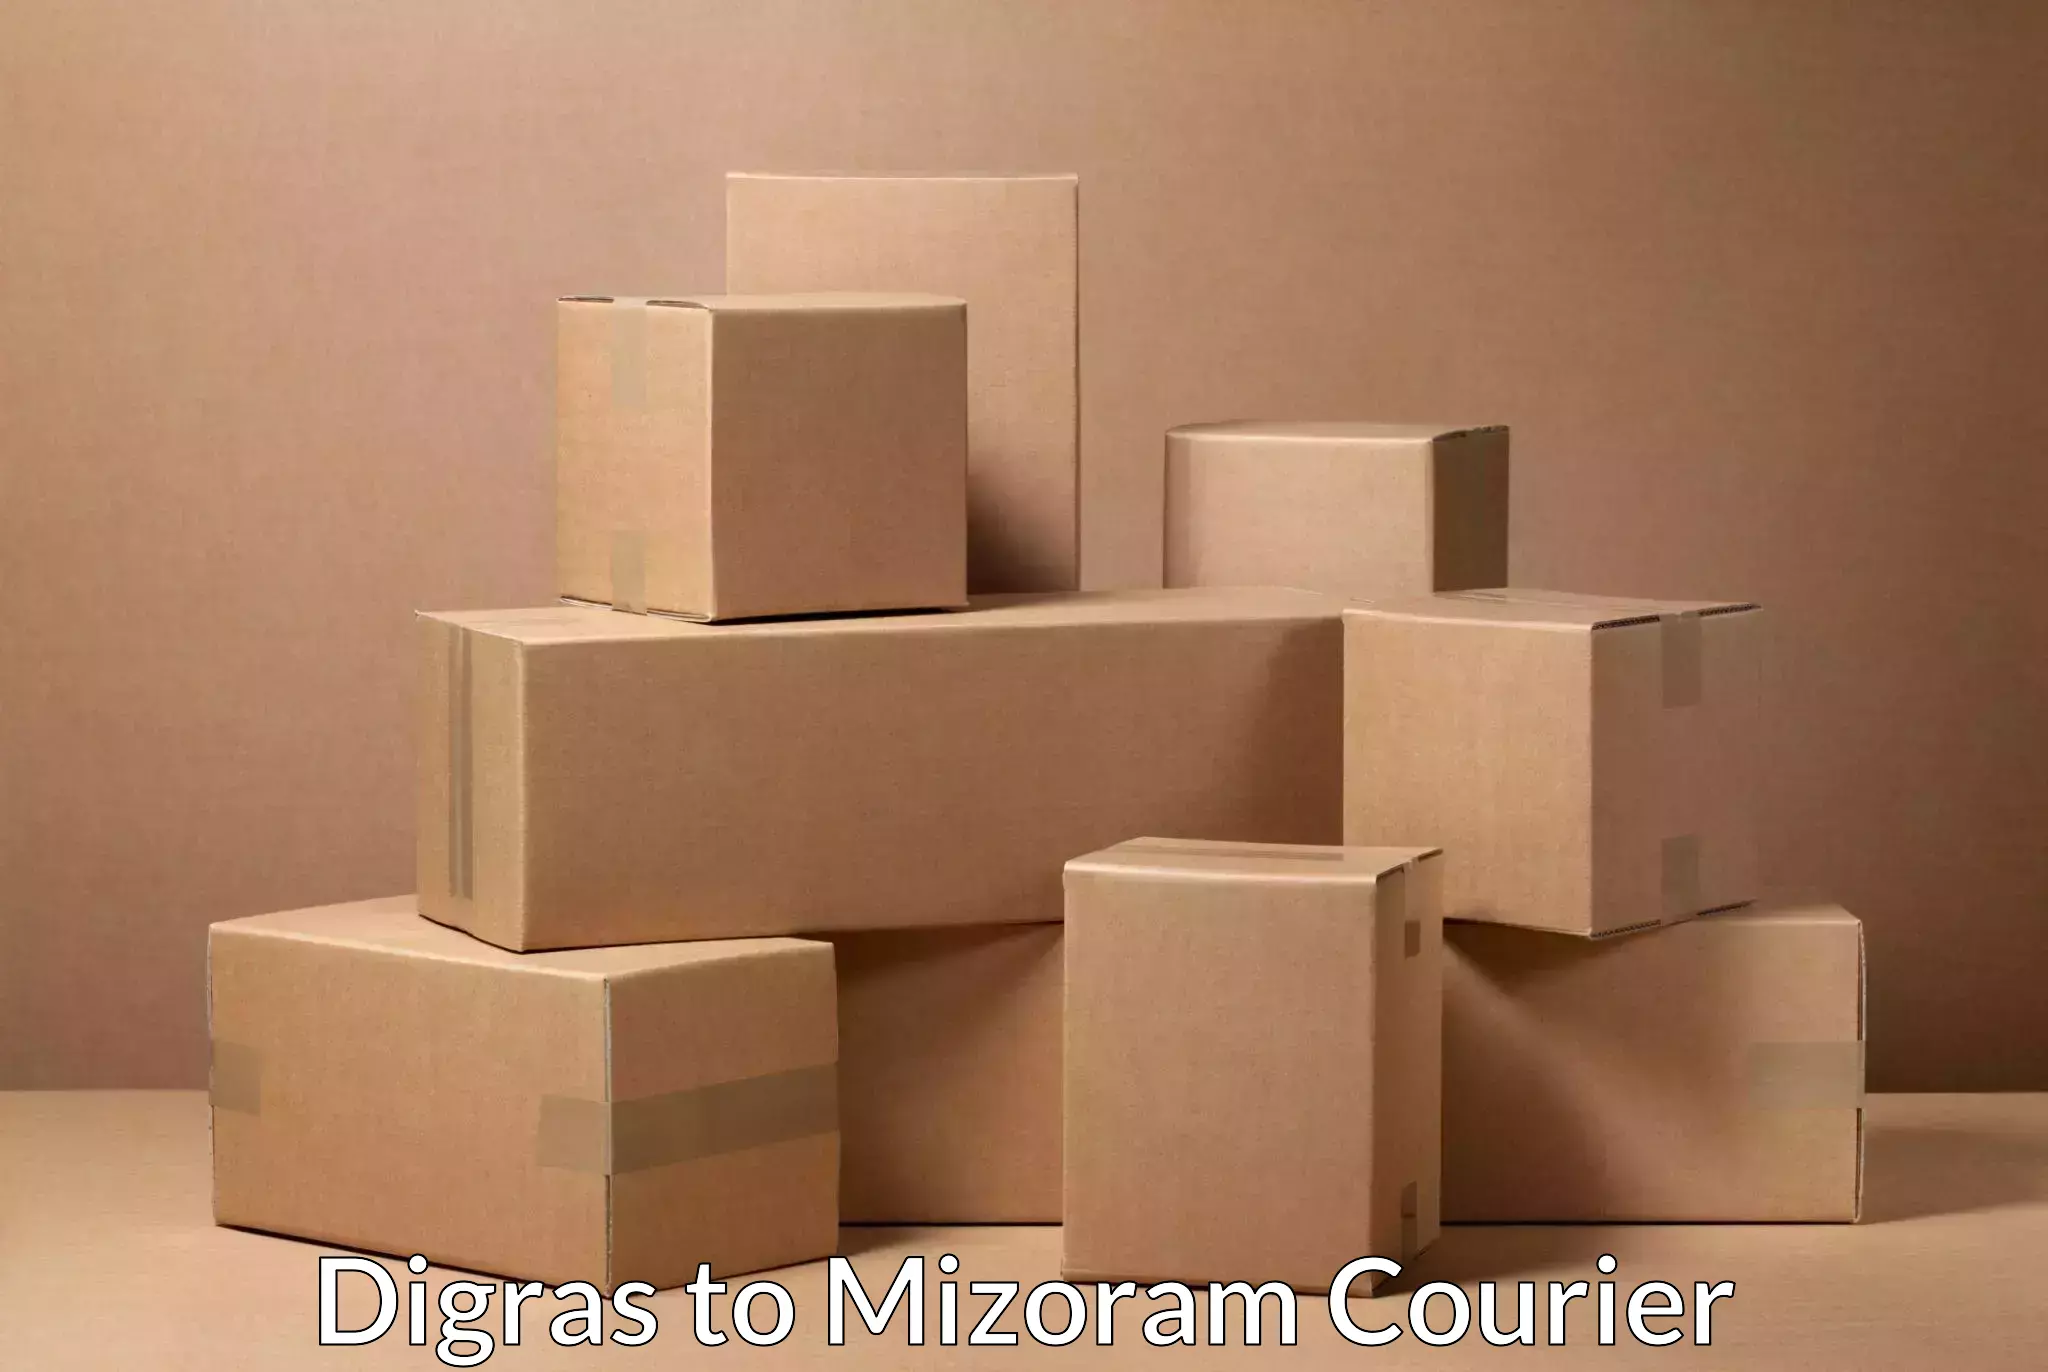 Next-day delivery options Digras to Mizoram